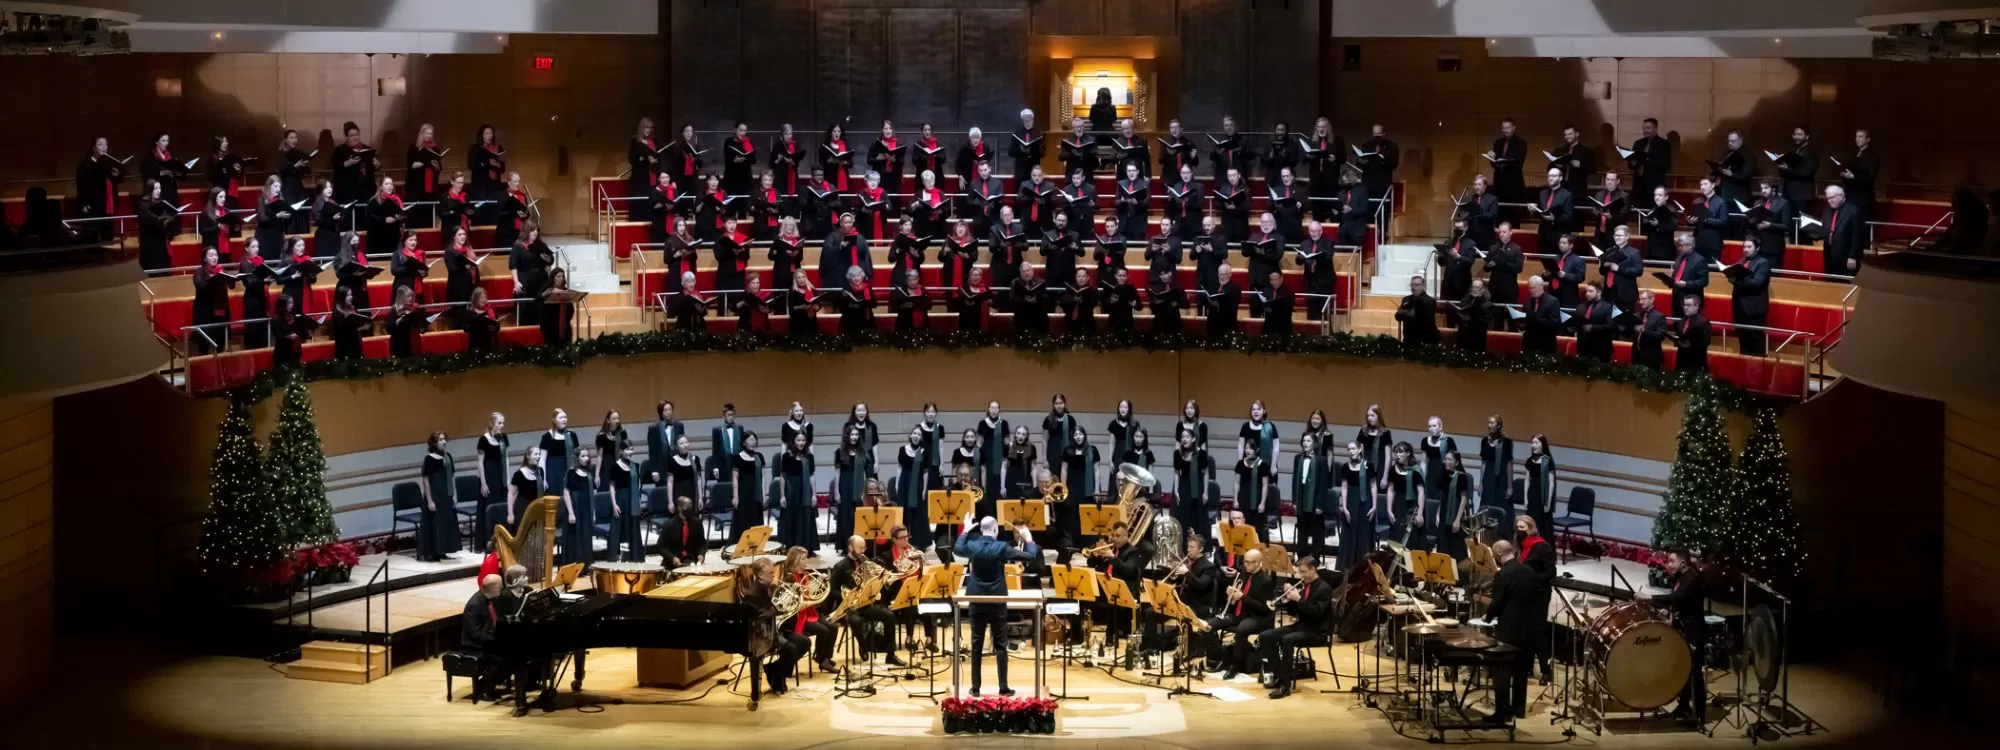 Announcing Programming for Pacific Chorale's Holiday Concerts!